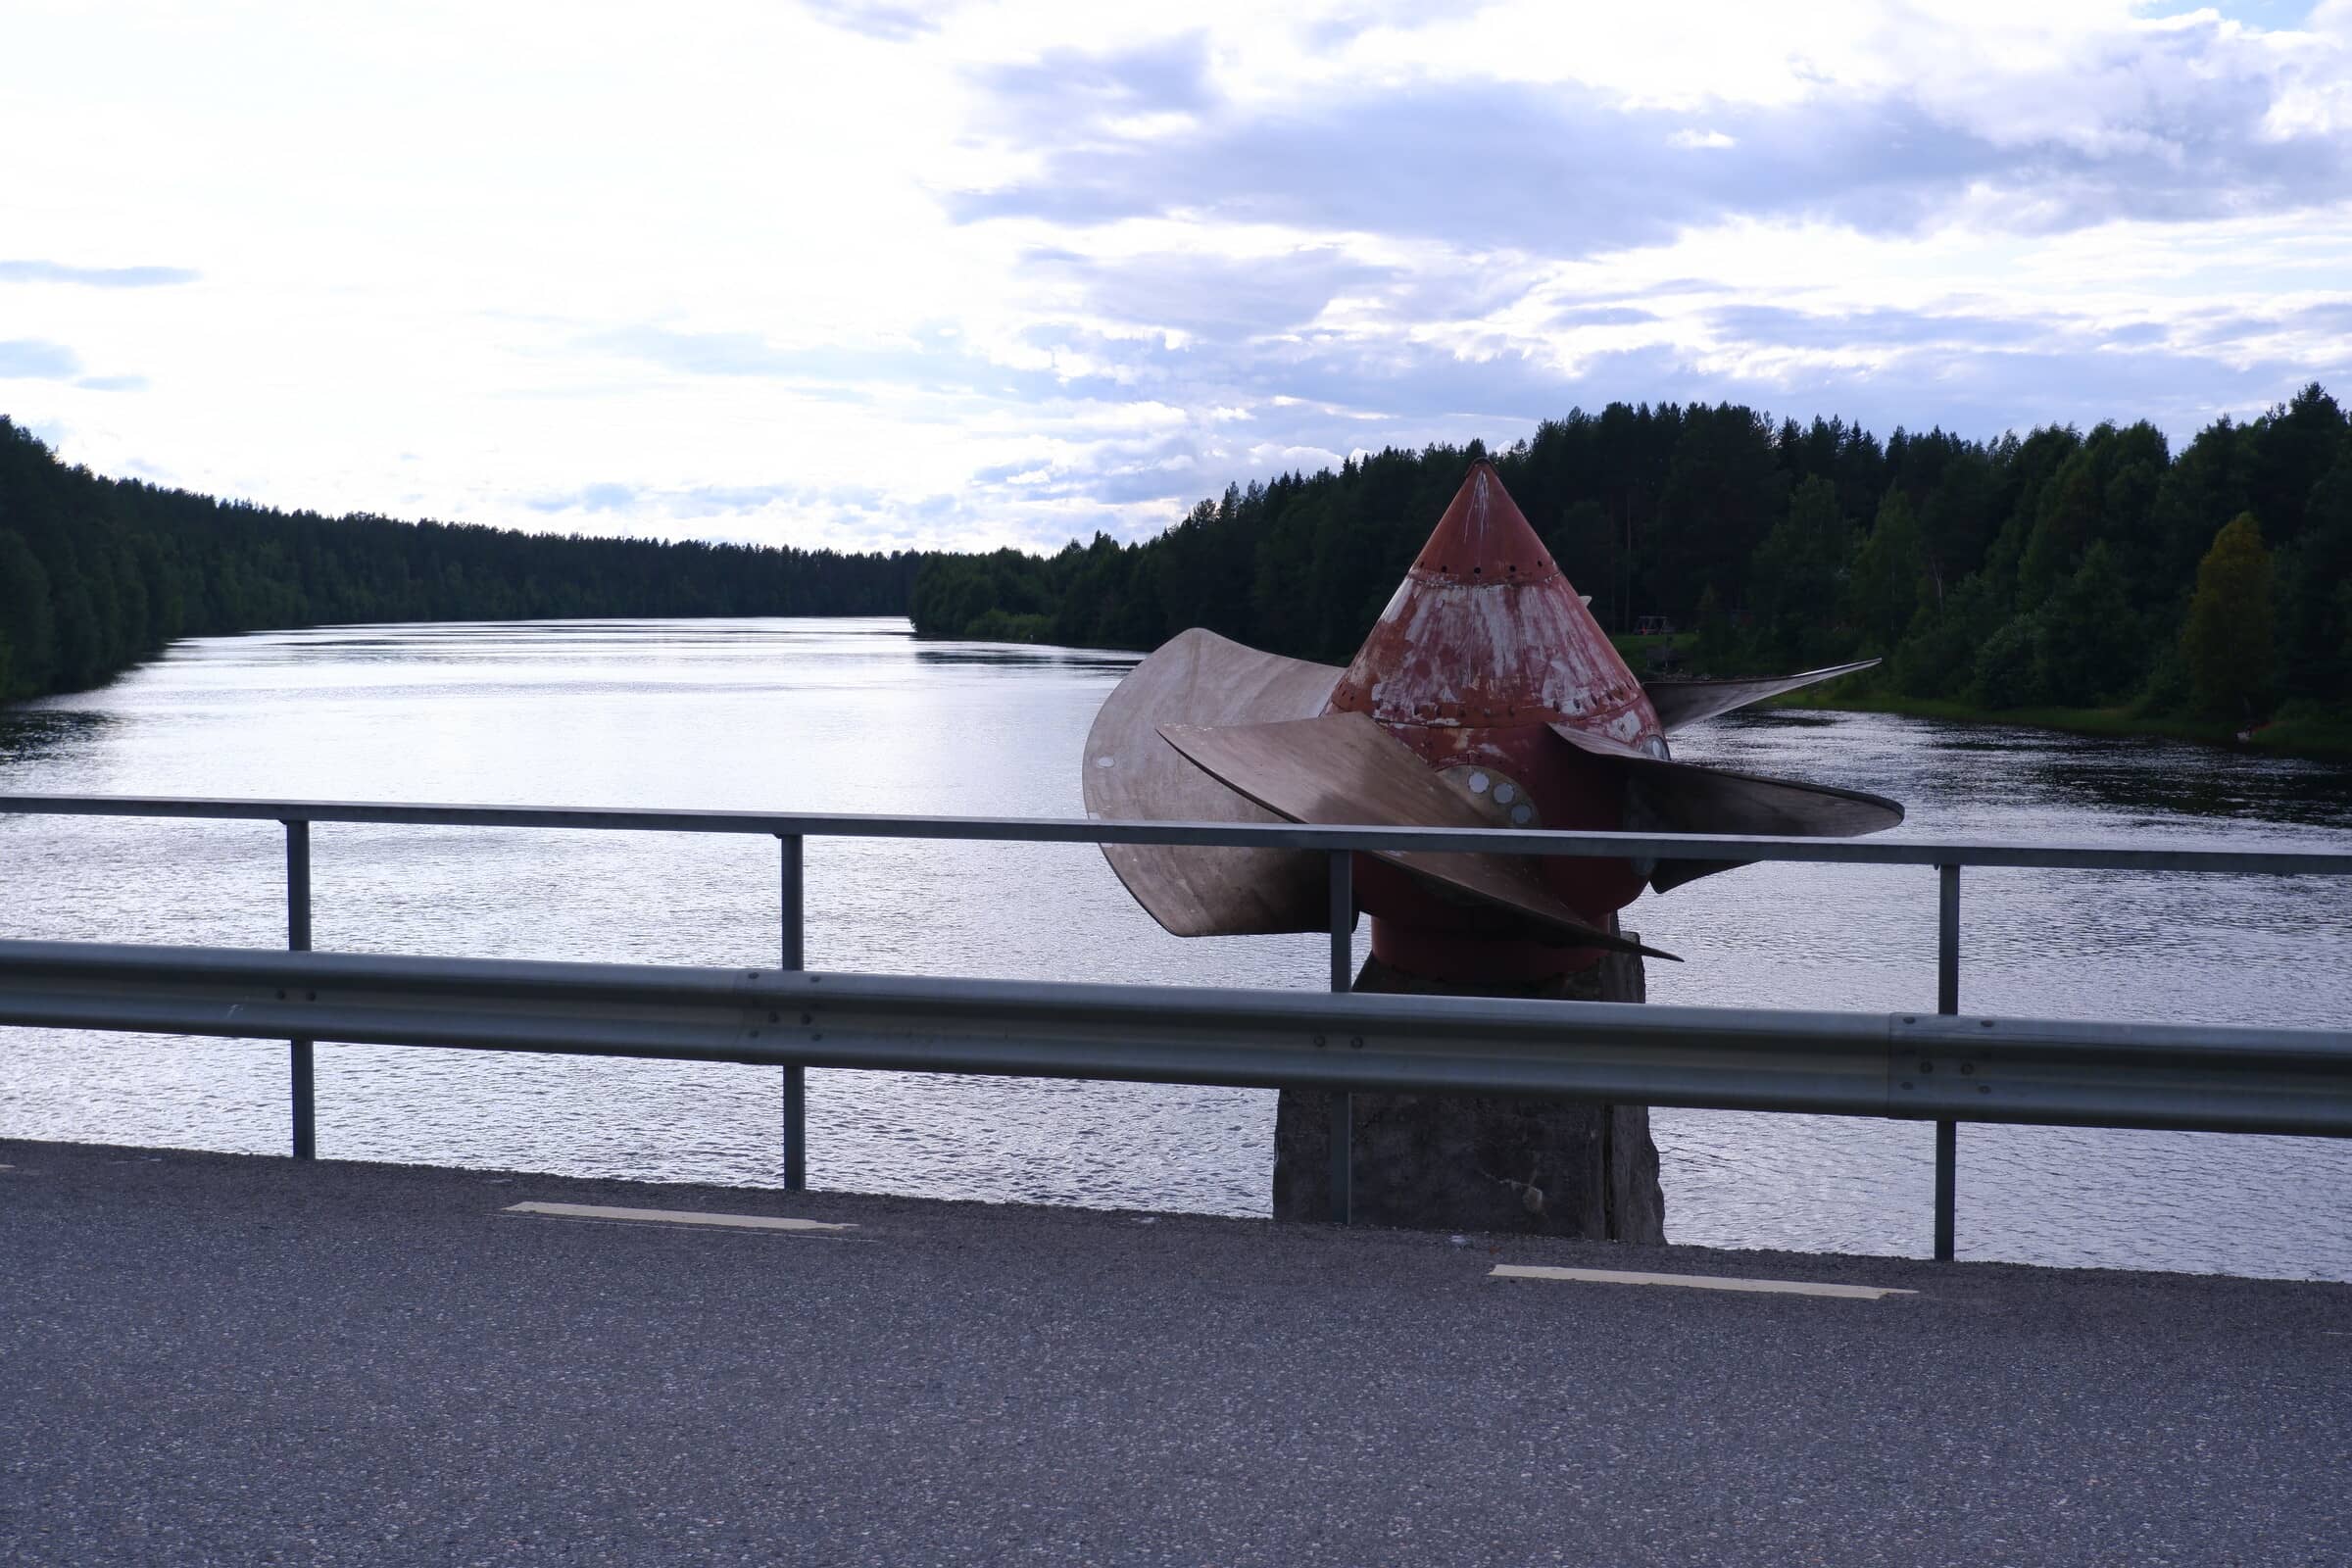 Hydropower turbine placed on a disused bridge pylon in the middle of a river.